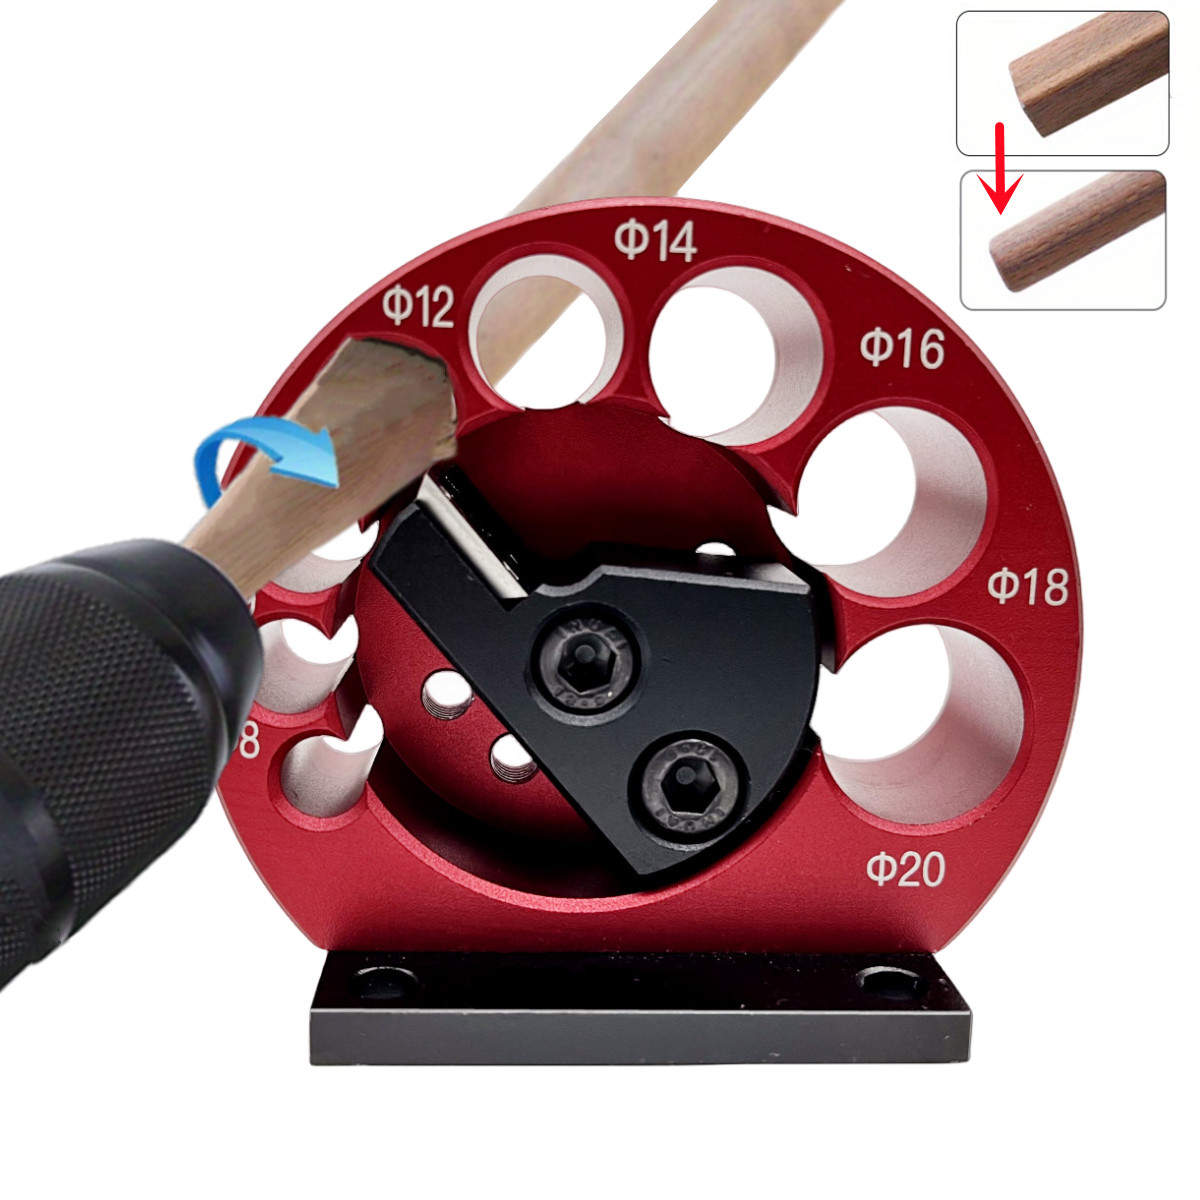 

1 Set Dowel Maker Jig, 8-holes Adjustable Dowel Maker Jig 8mm-20mm With Carbide Blades Woodworking Electric Drill Milling Dowel Round Rod Auxiliary Tool